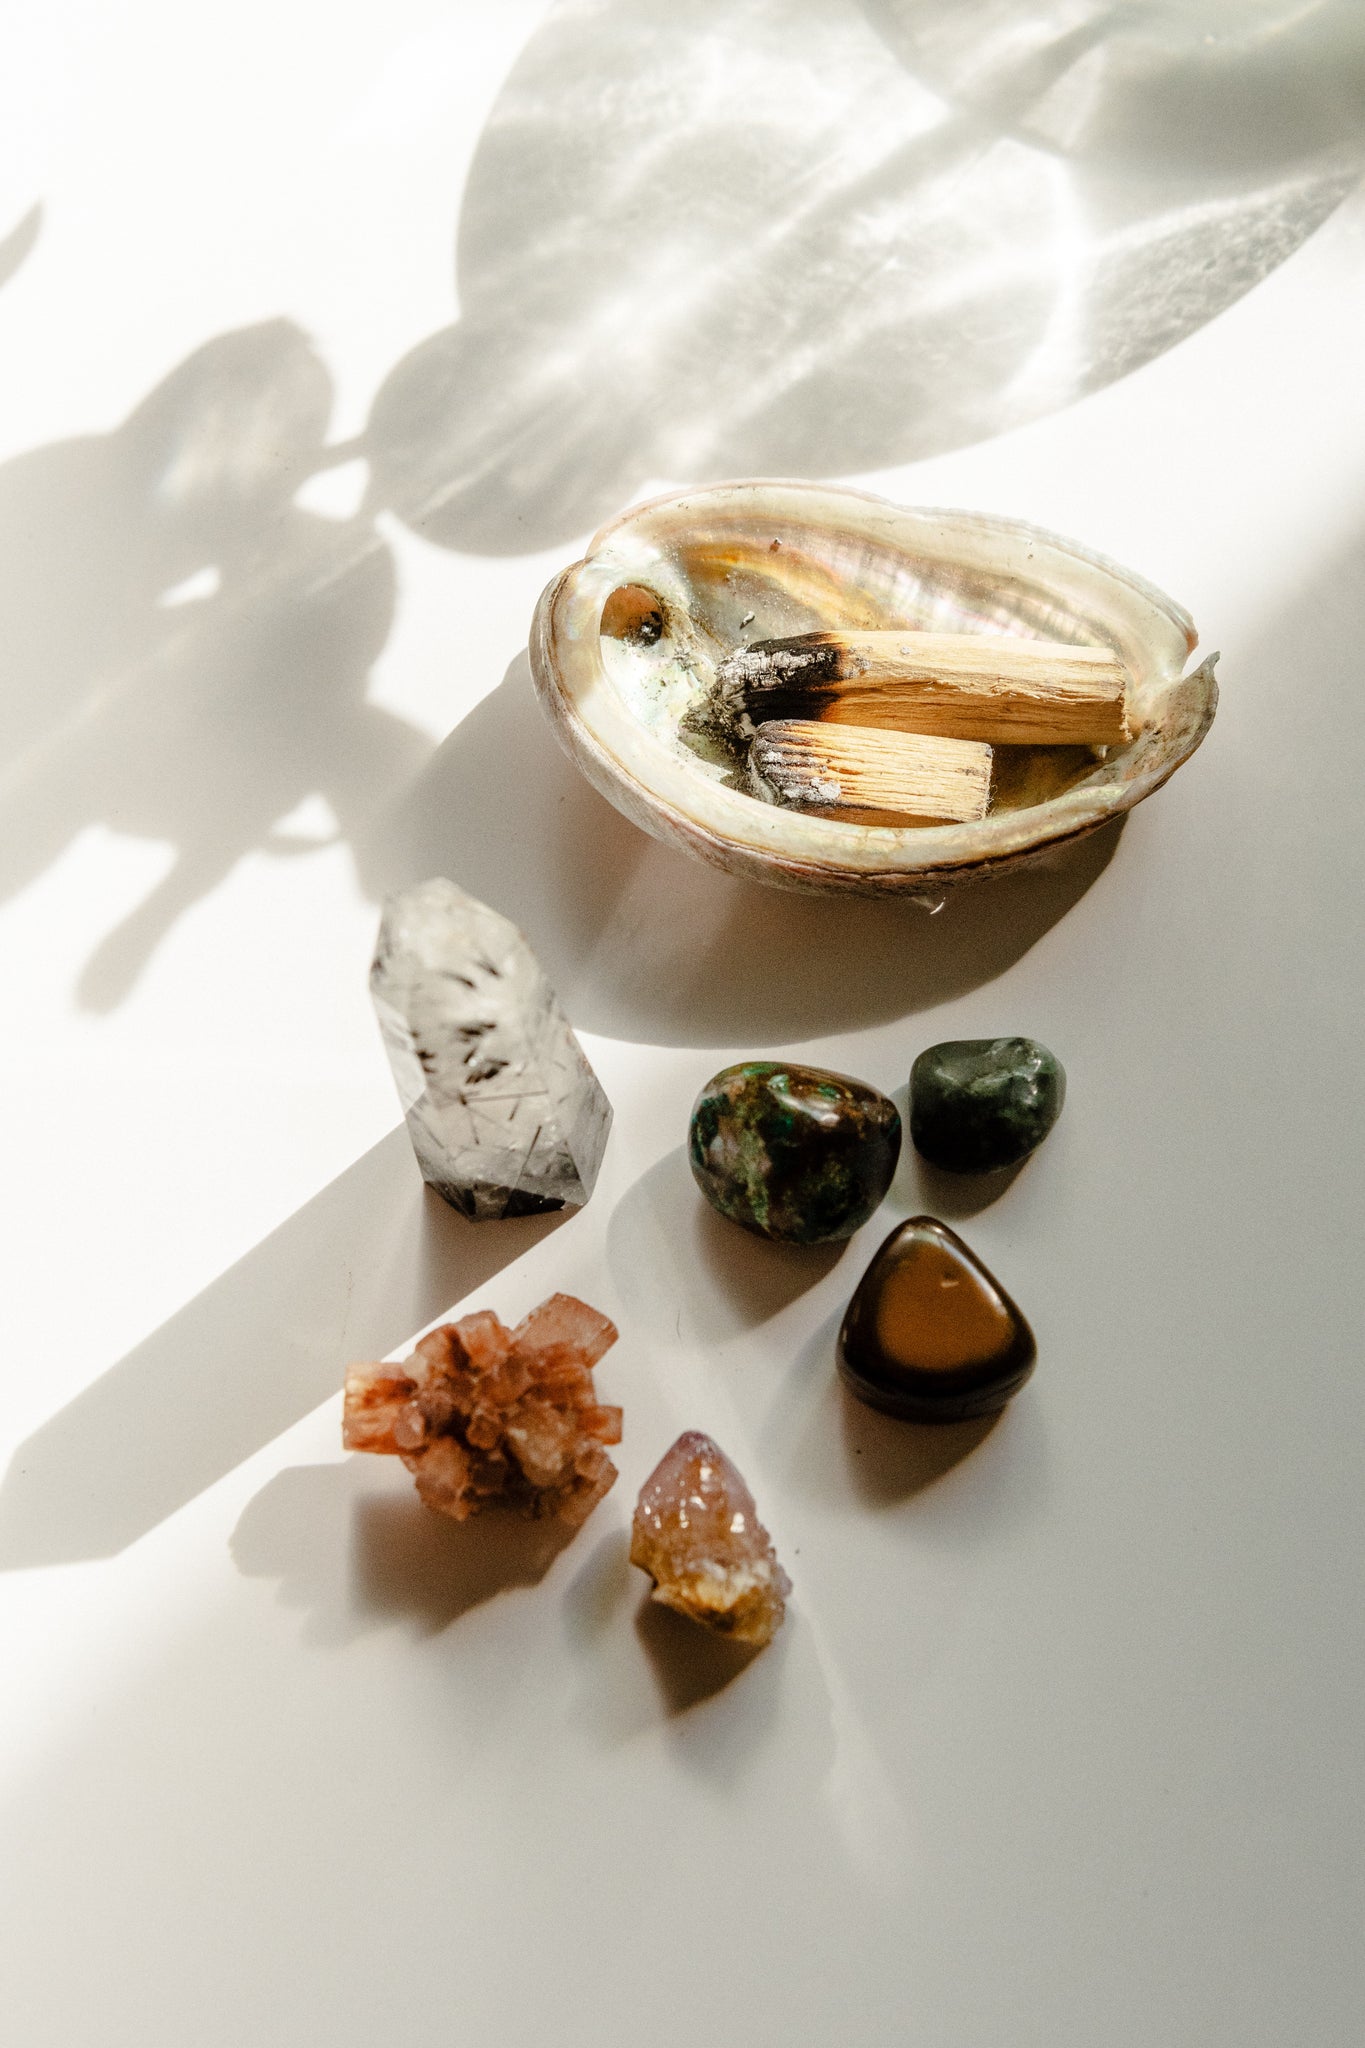 Experience the excitement of surprise with our Mystery Gemstone Gift Set. Receive a hand-picked gemstone bracelet, sphere, wand, worry stone, druzy, pyramid, incense, smoke wands, or resins valued from $15-$40. Perfect for gifting or personal surprises. Unveil the unexpected! Please note: Multiple mystery gift items may not be all different. No returns or exchanges on mystery gifts